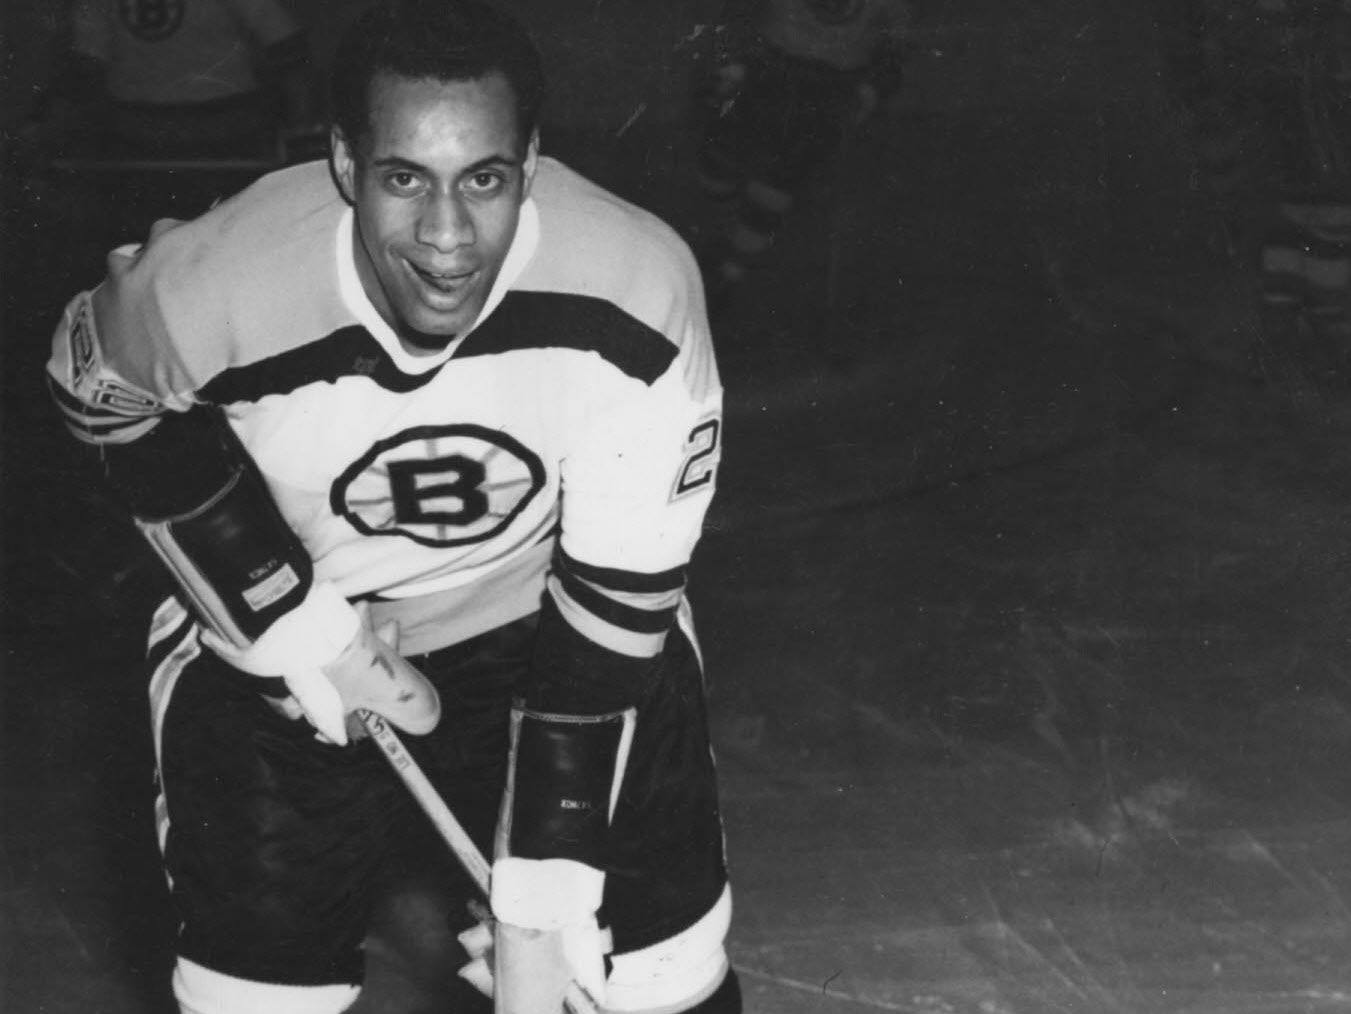 Bruins retire No. 22 jersey of O'Ree, NHL's first Black player